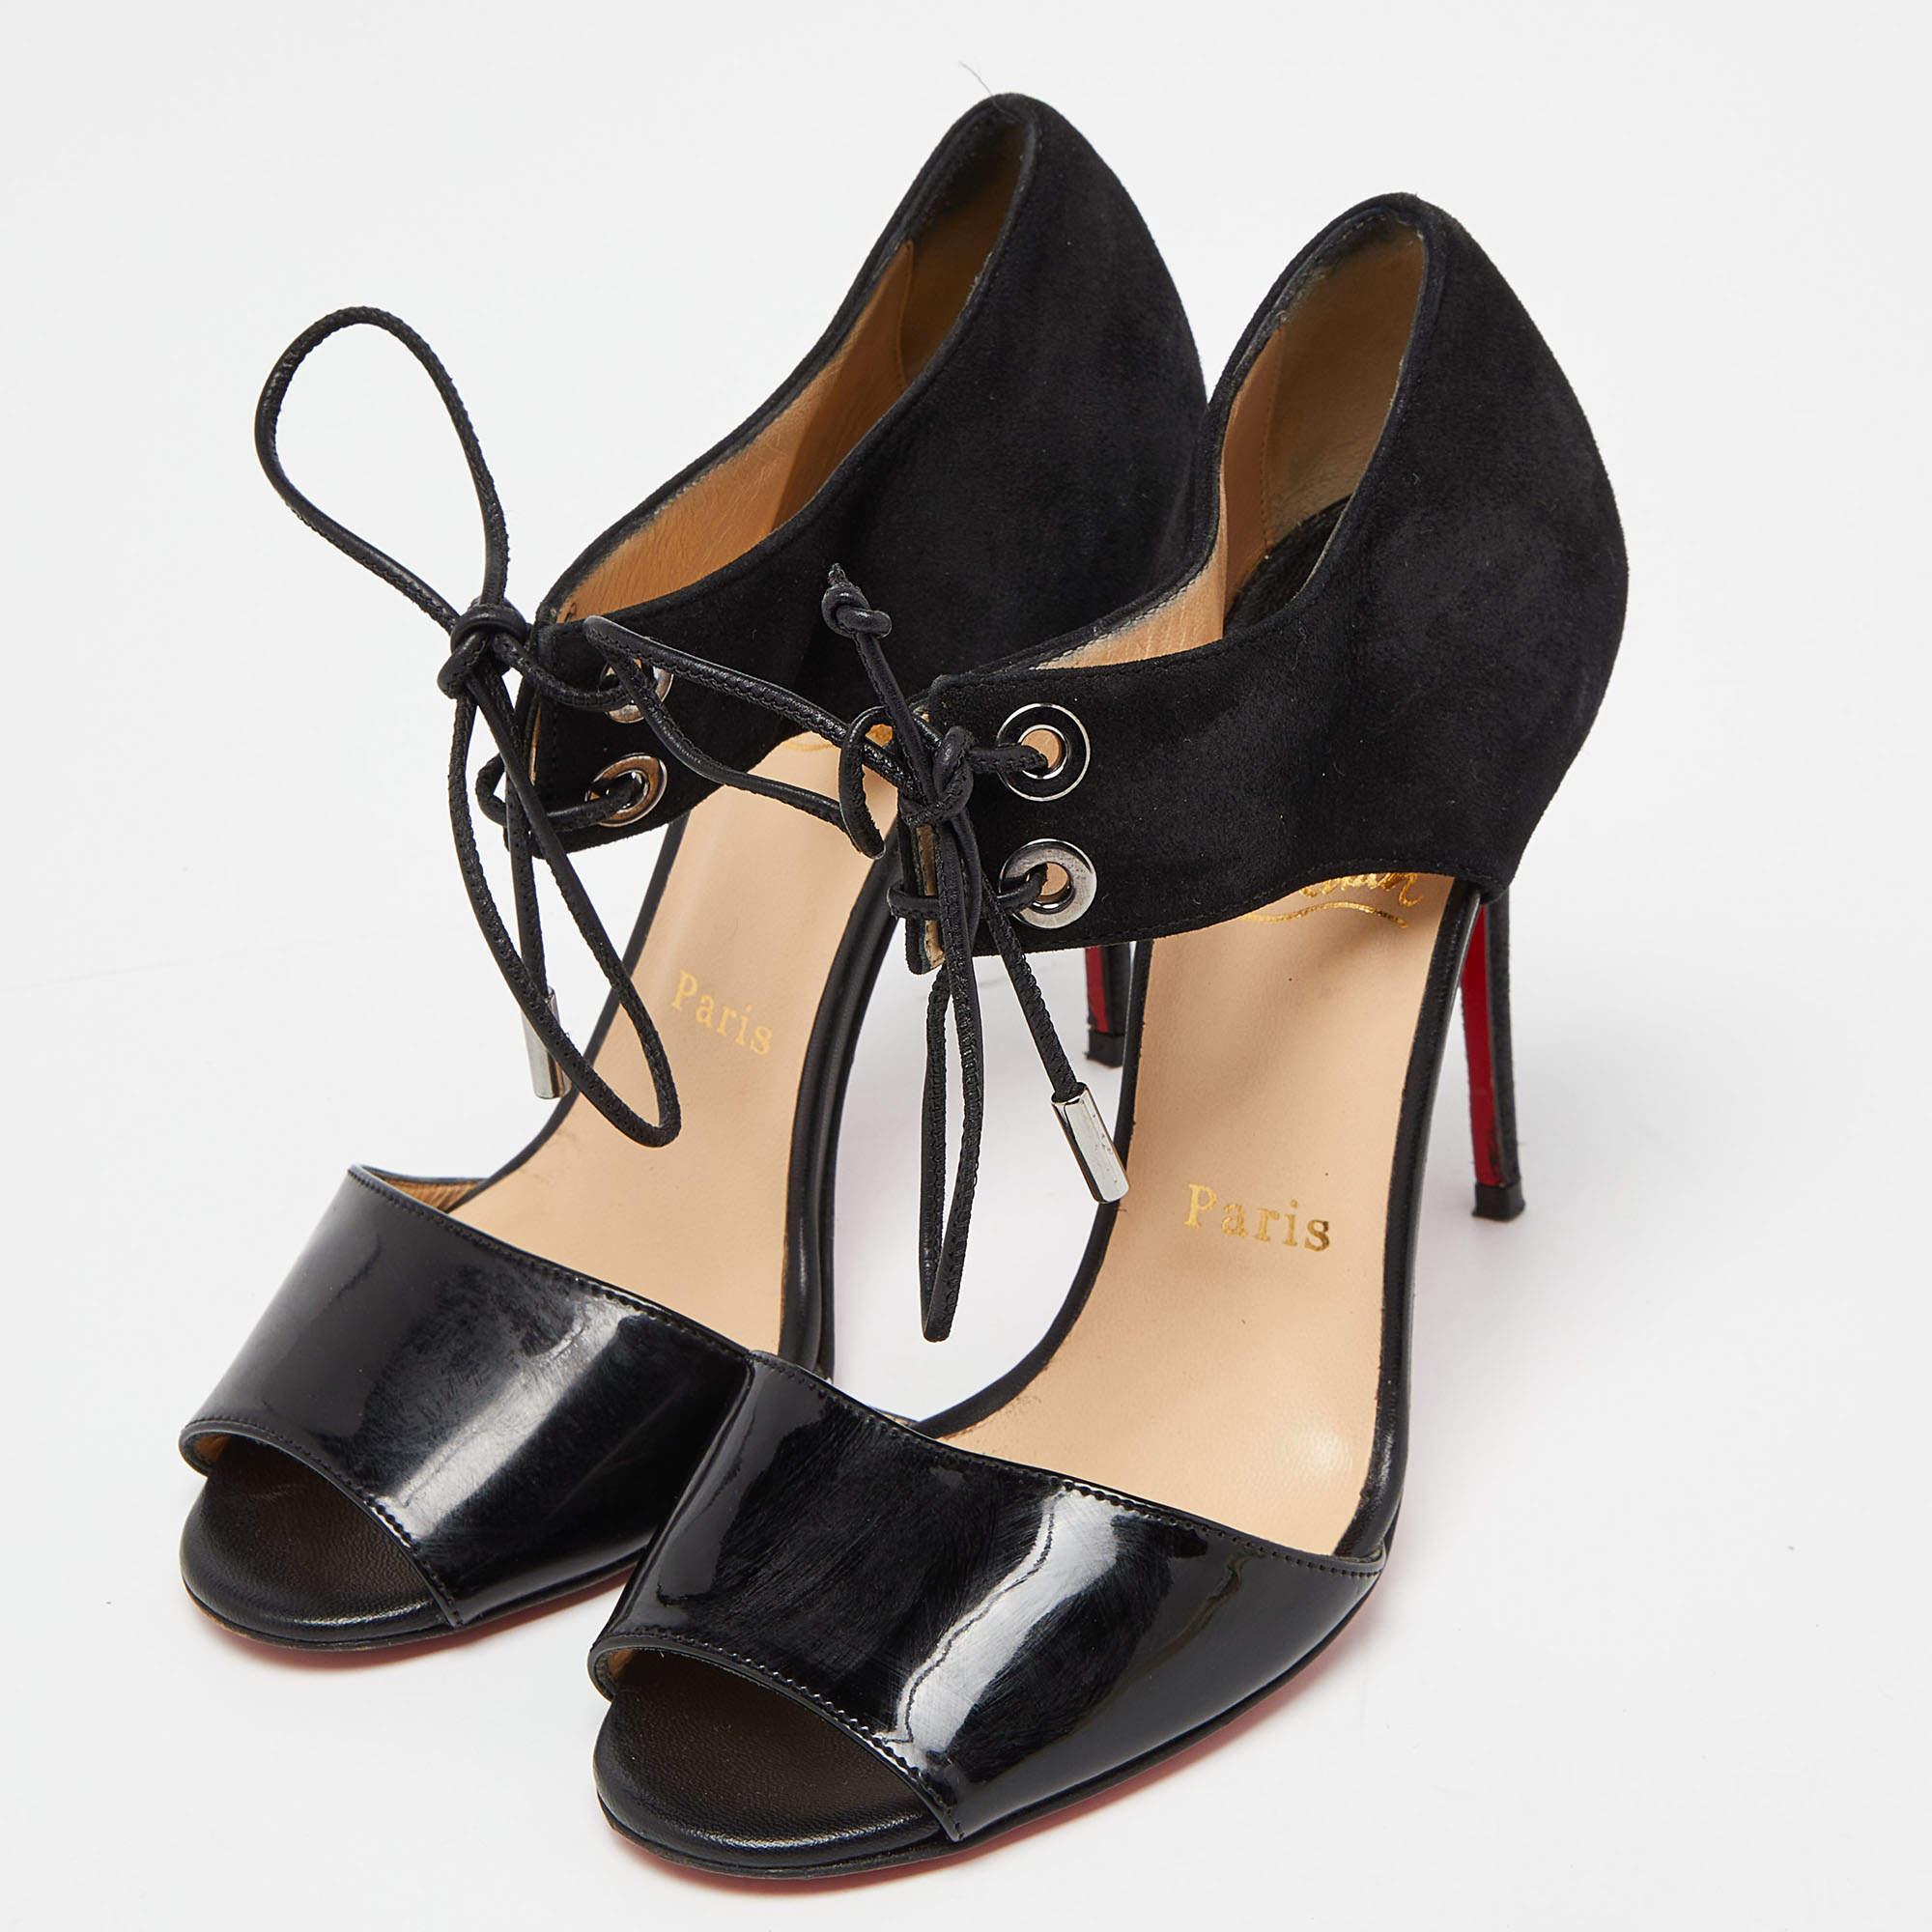 This pair of sandals by Christian Louboutin delivers sophistication. The shoes come made from suede & patent leather in a classy shade of black and are designed with lace-ups and 10cm heels.

